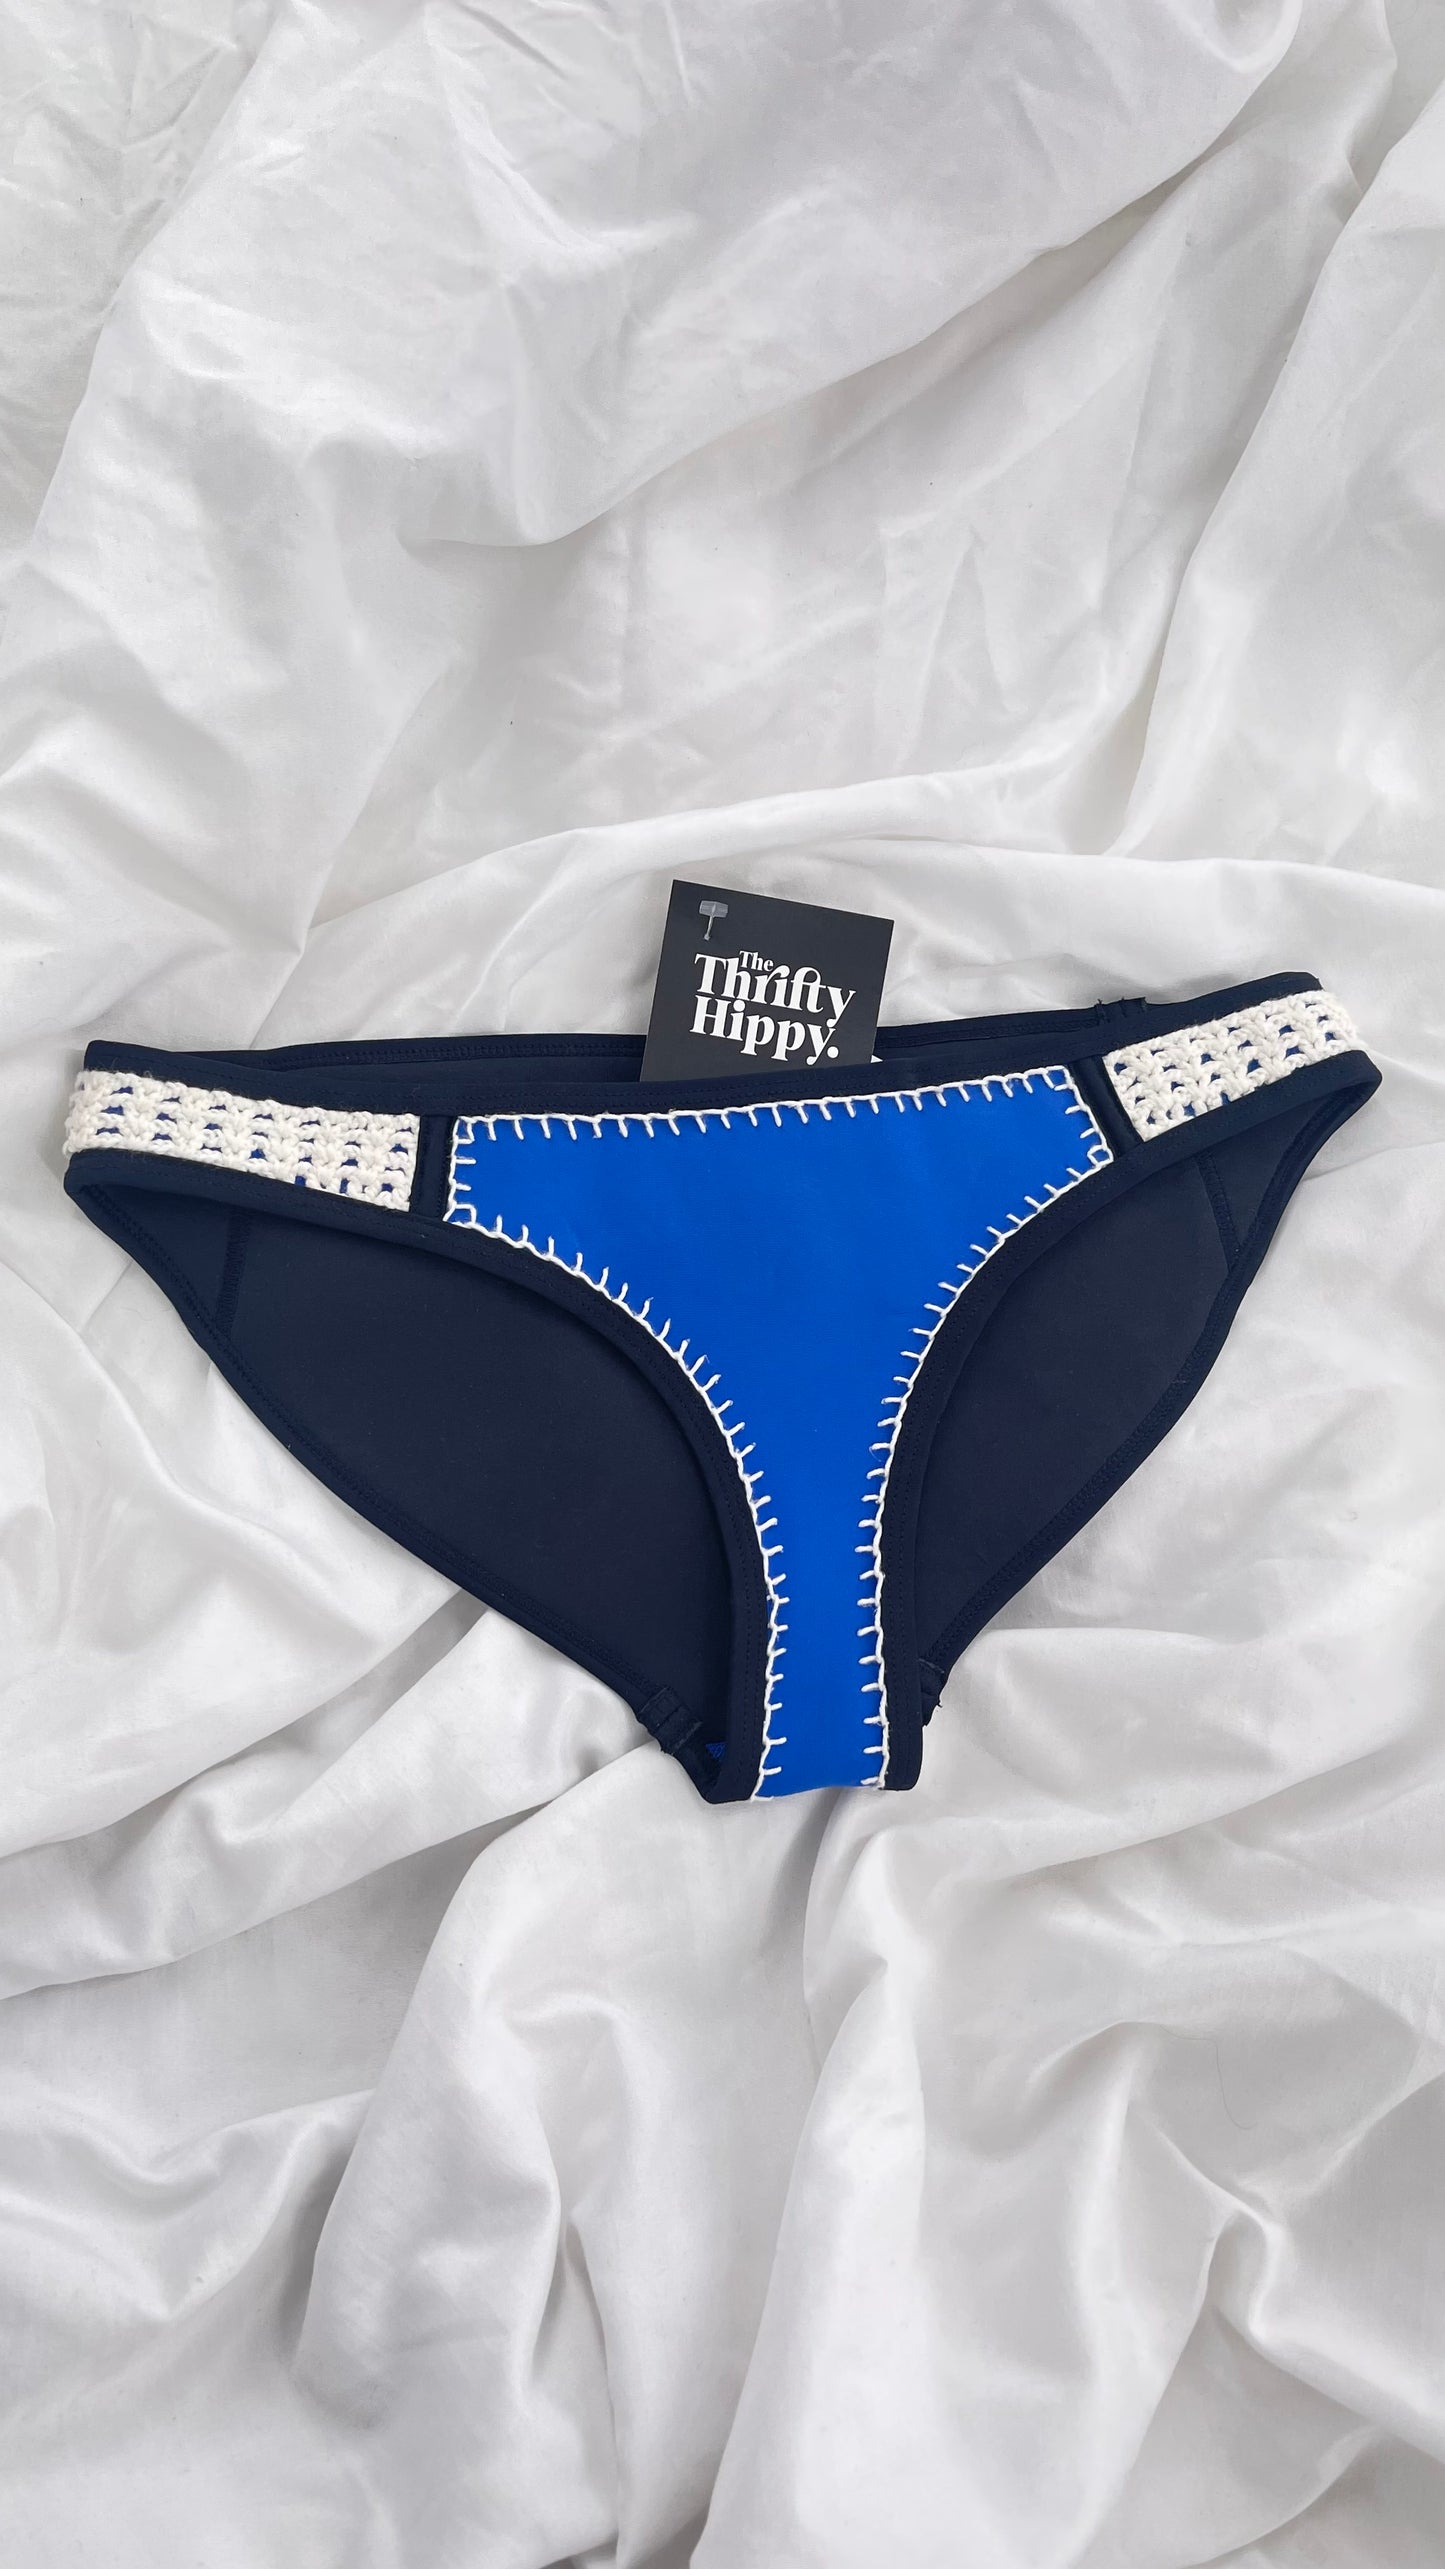 TRIANGL Swim Royal Blue and Black Neoprene Swim Bottoms with Crochet Sides (Small)